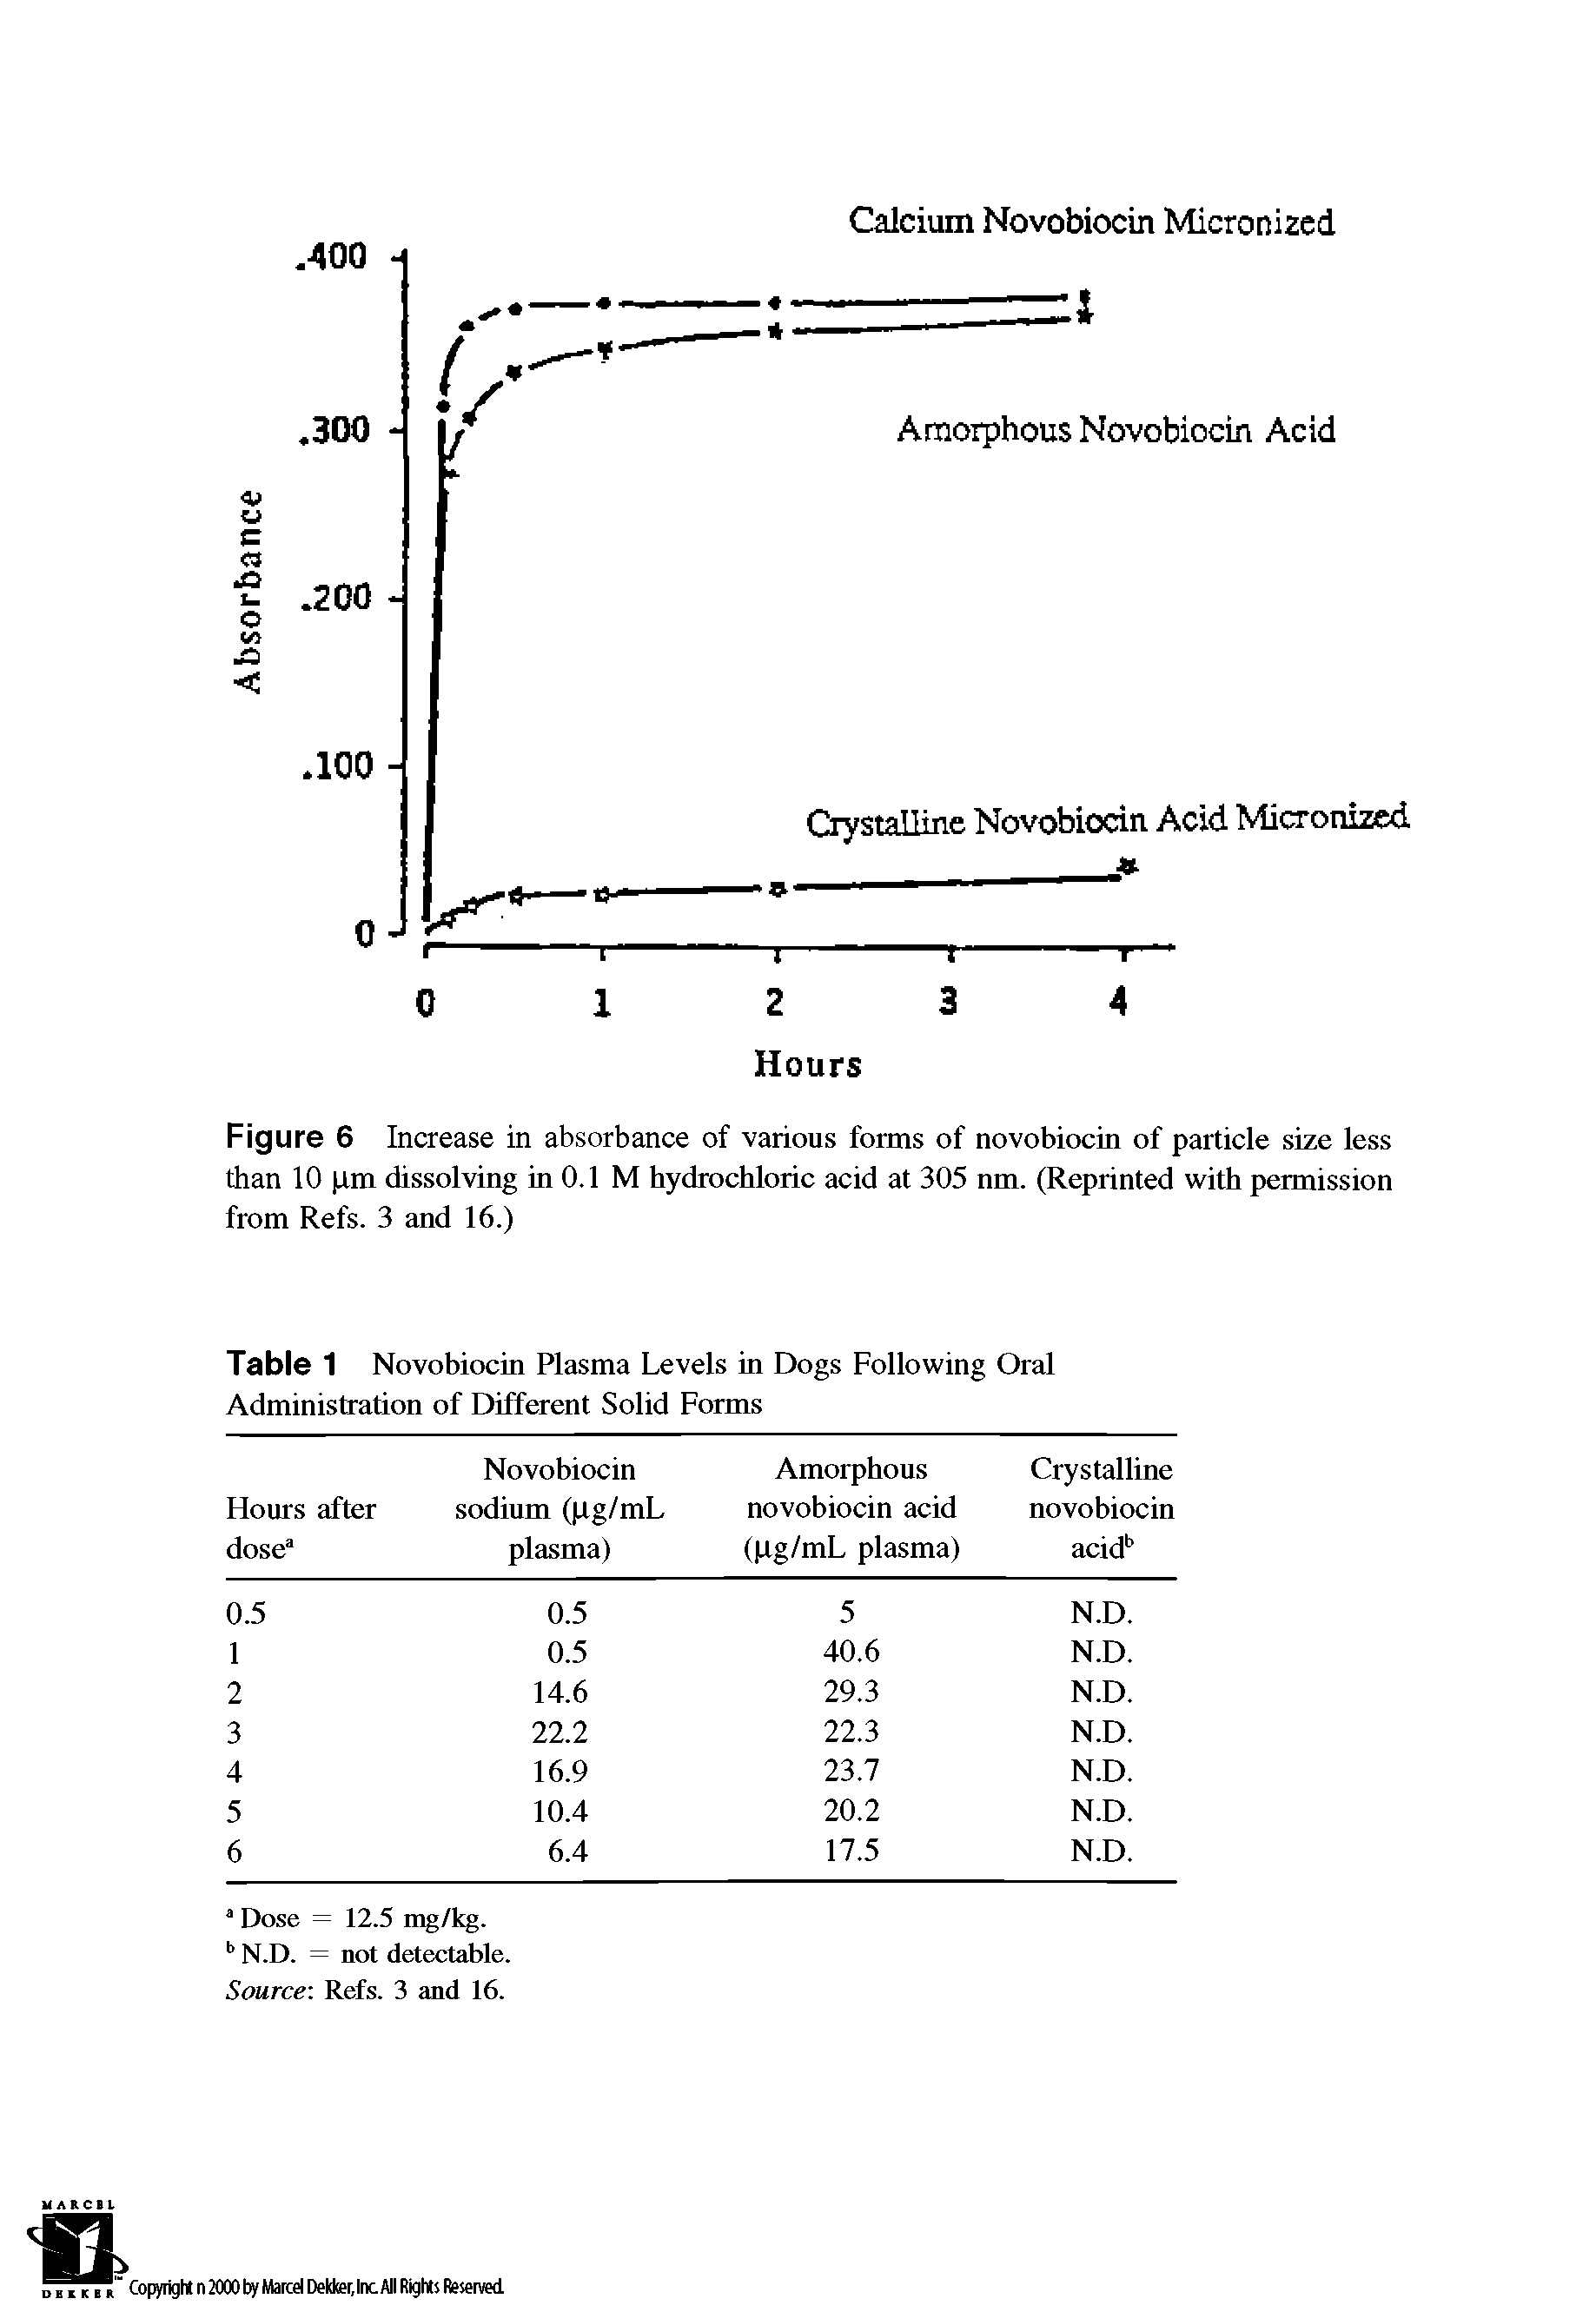 Figure 6 Increase in absorbance of various forms of novobiocin of particle size less than 10 pm dissolving in 0.1 M hydrochloric acid at 305 nm. (Reprinted with permission from Refs. 3 and 16.)...